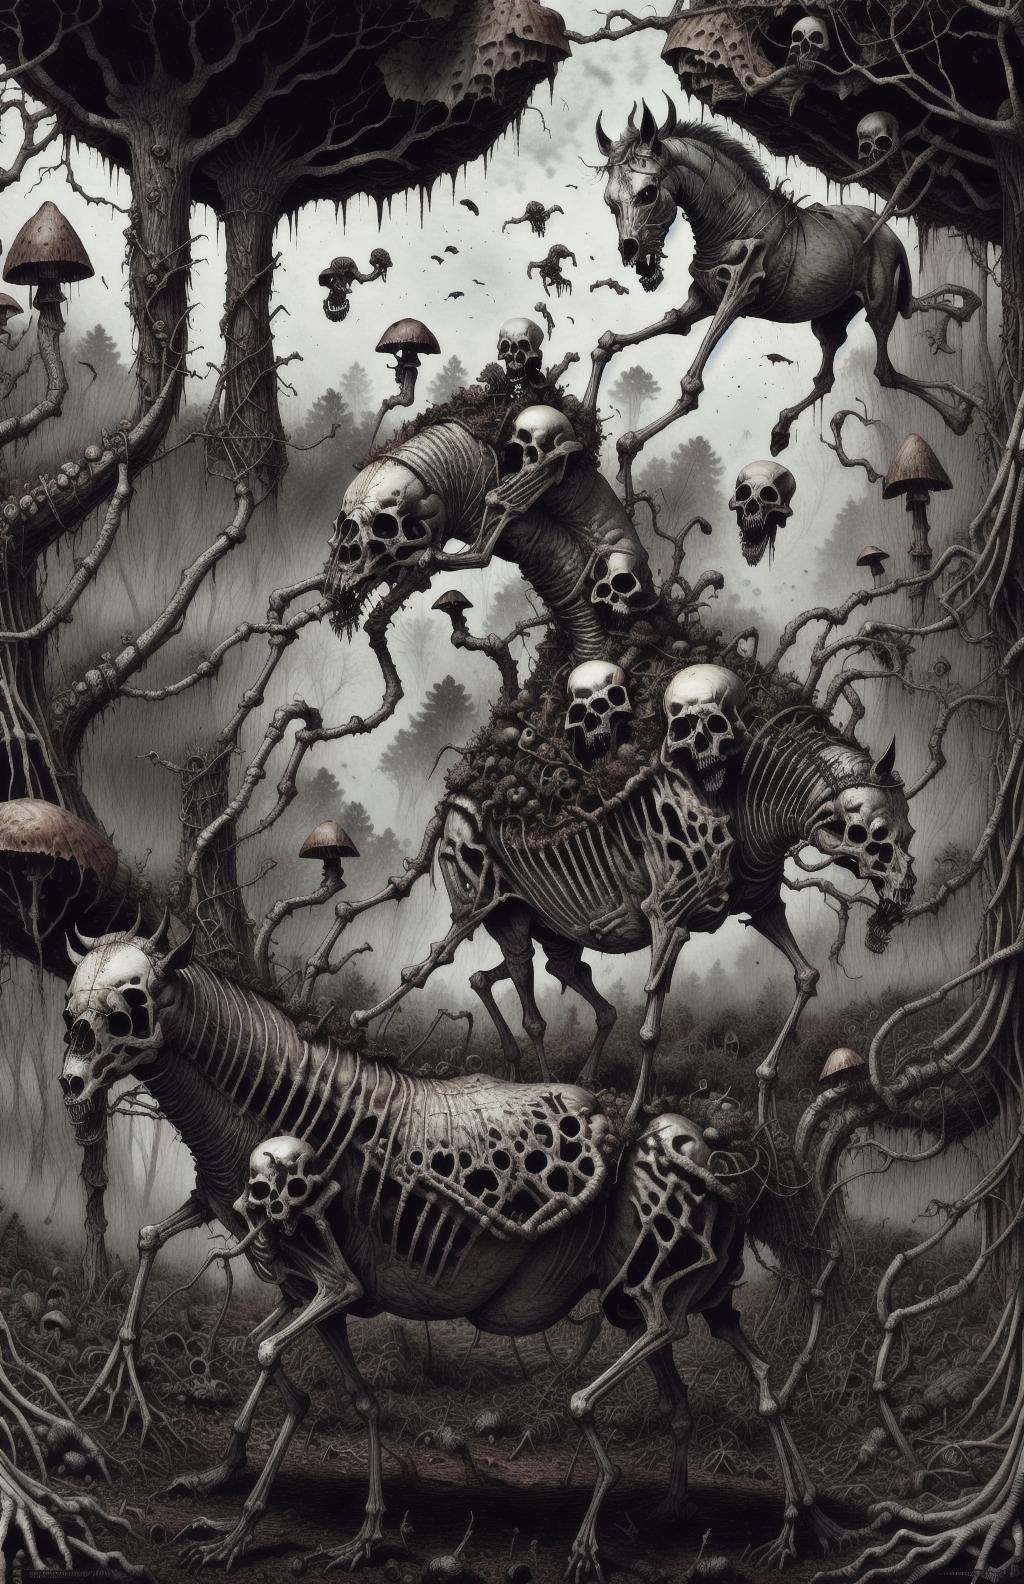 A dark and eerie scene with skeletons and mushrooms.